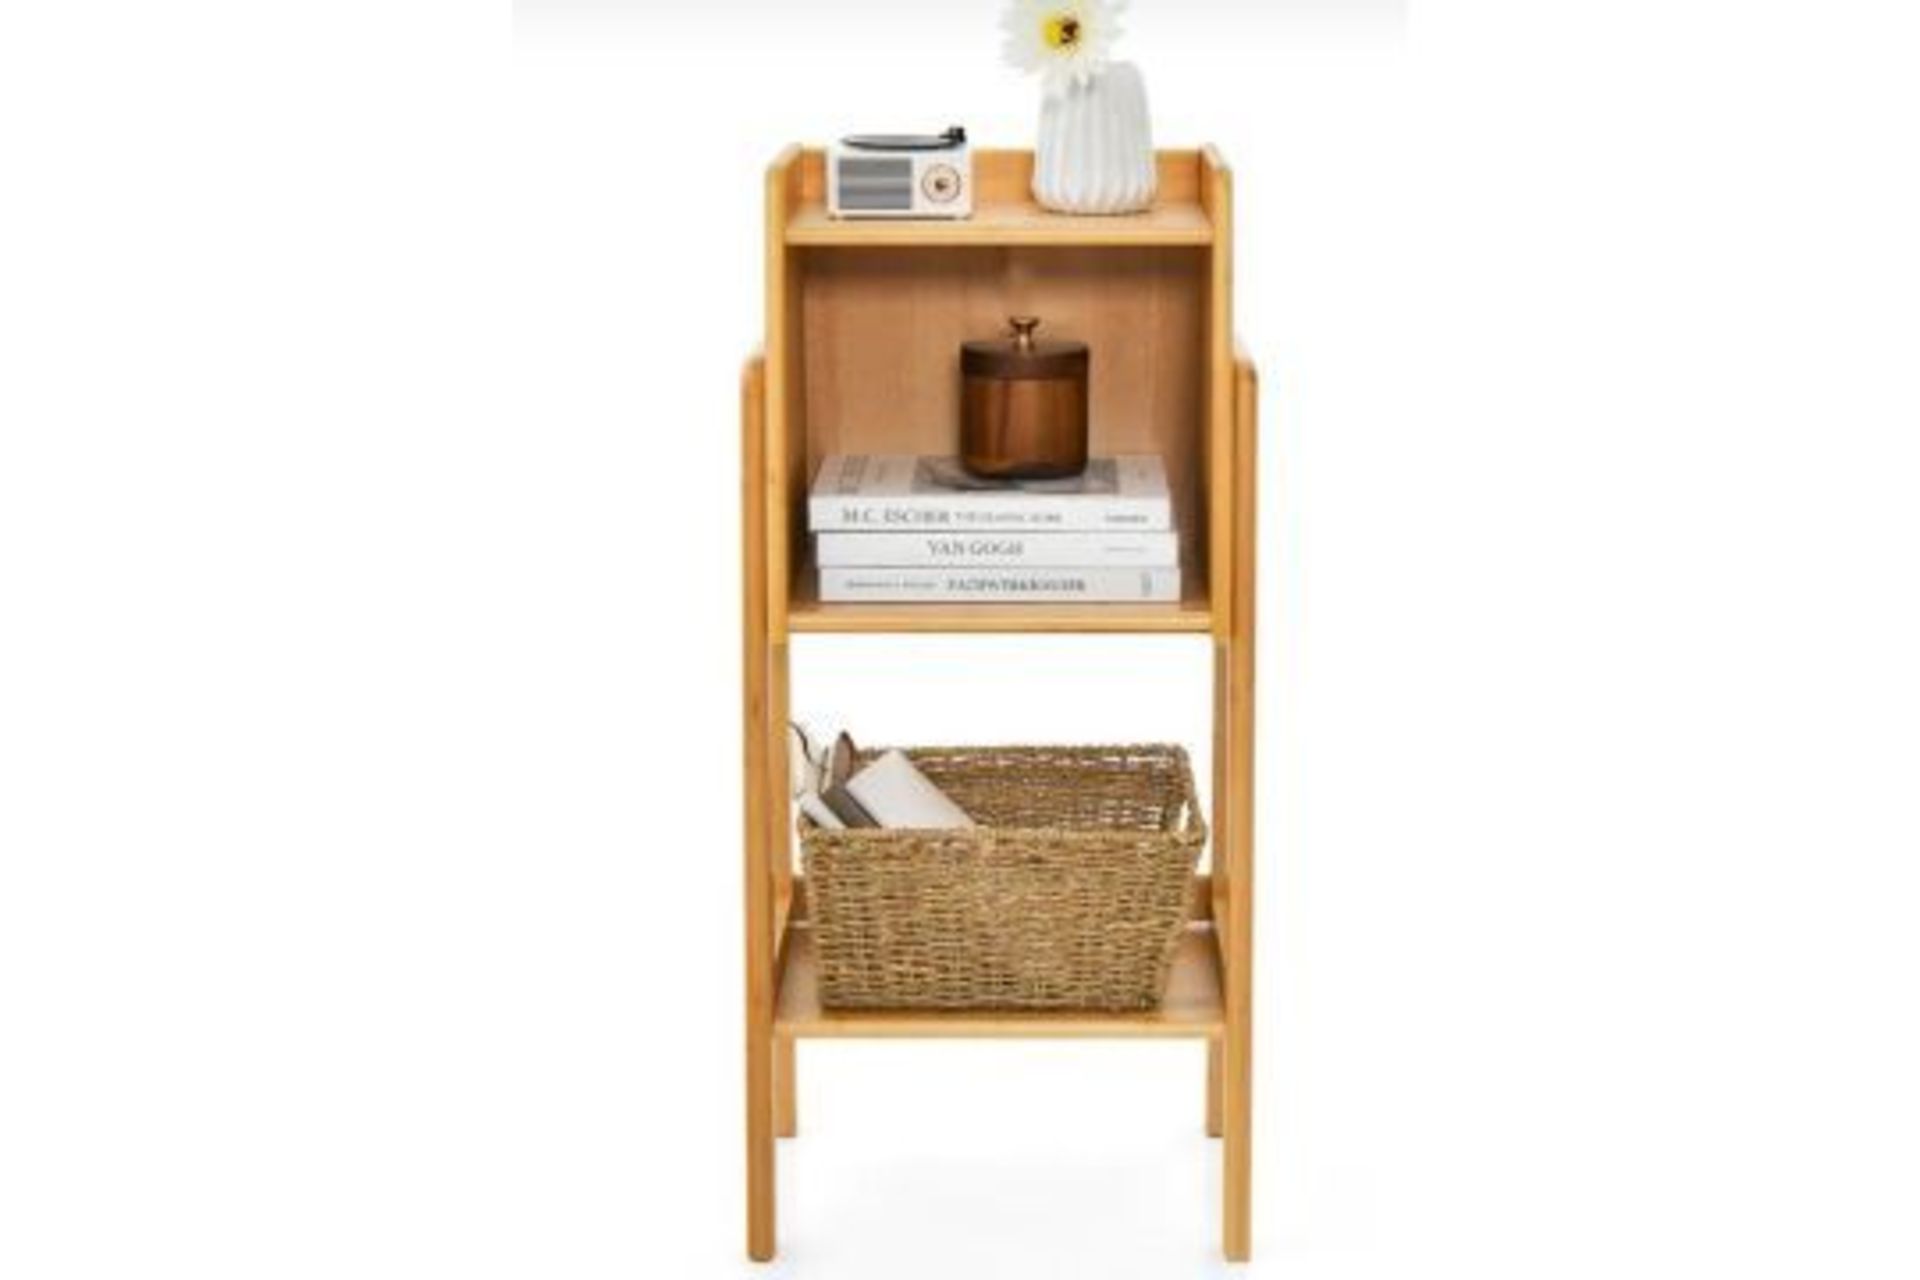 3 TIER FREE STANDING TALL BAMBOO BOOKSHELF WITH LEGS. - R14.2. Are you in need of a storage solution